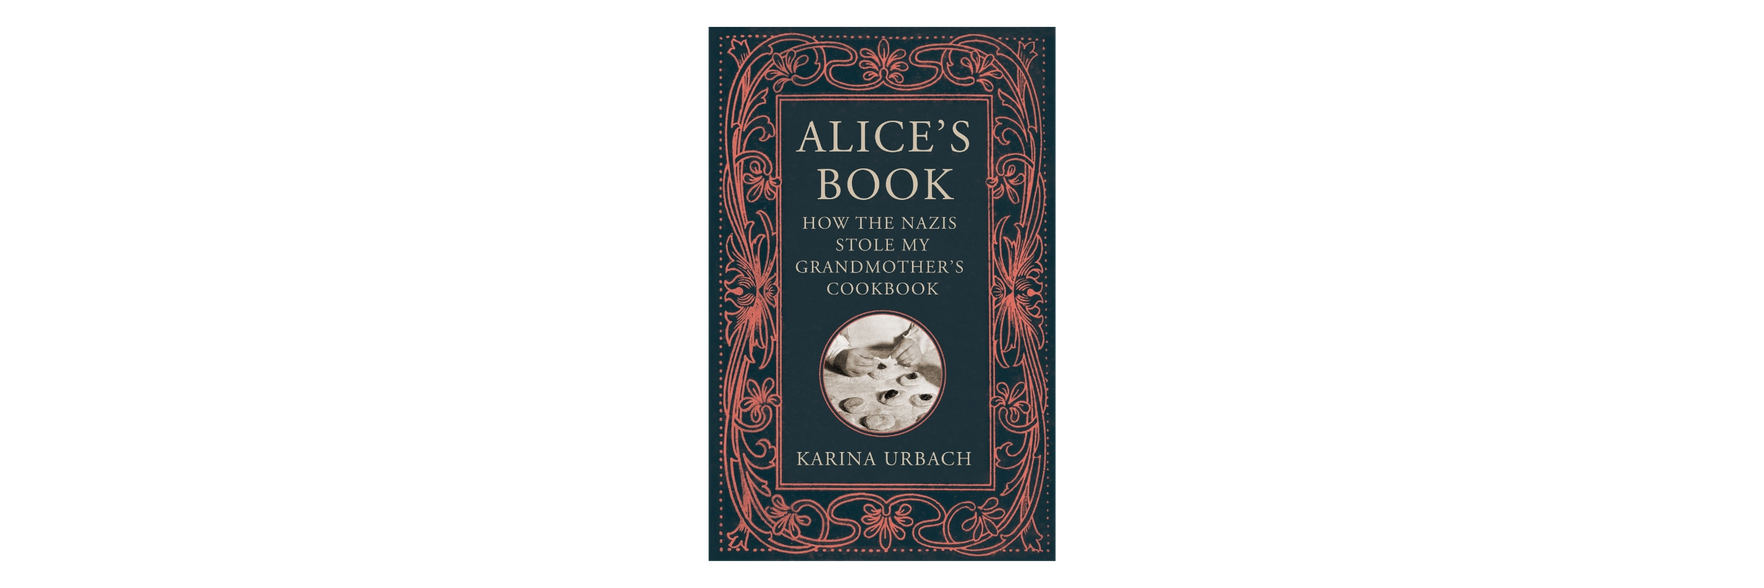 Alice's Book: How the Nazis Stole My Grandmother's Cookbook by Karina Urbach